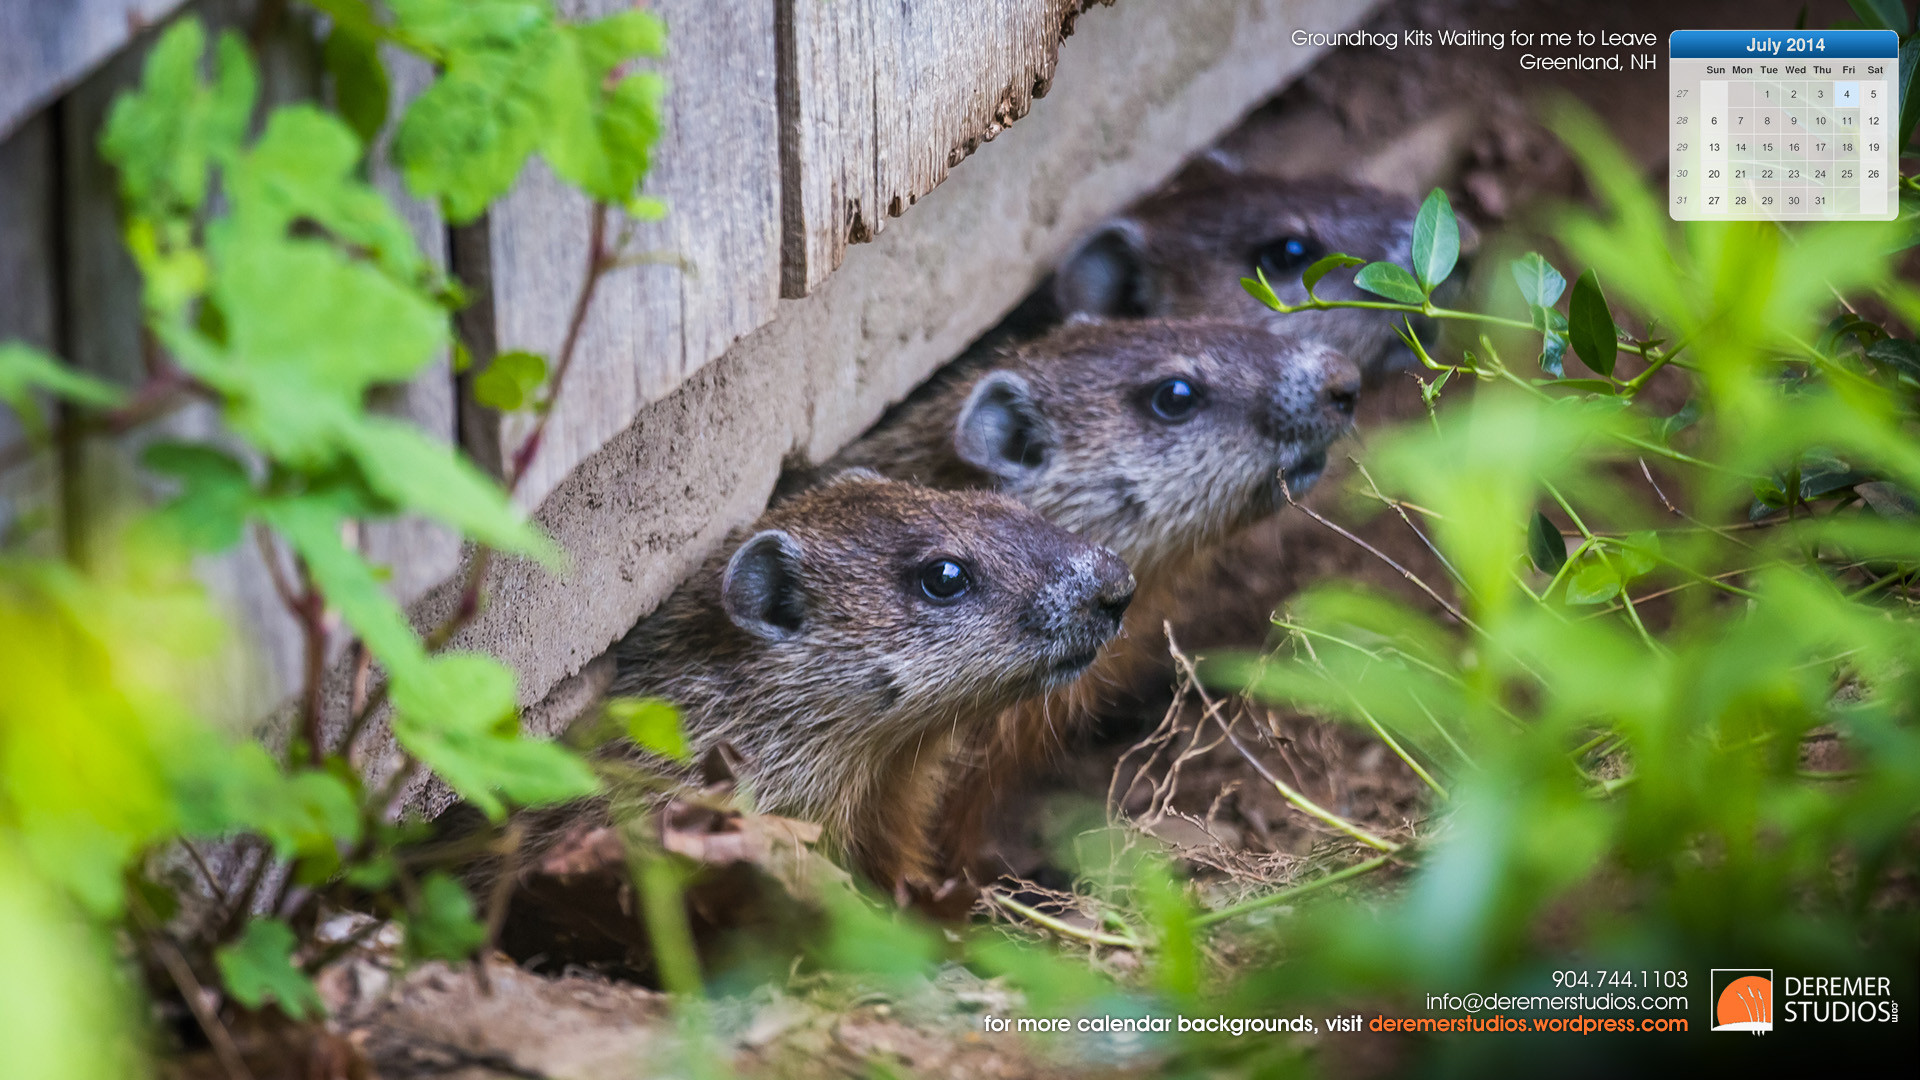 1920x1080 2014 07 July Wallpaper – Groundhog Kits waiting for me to Leave